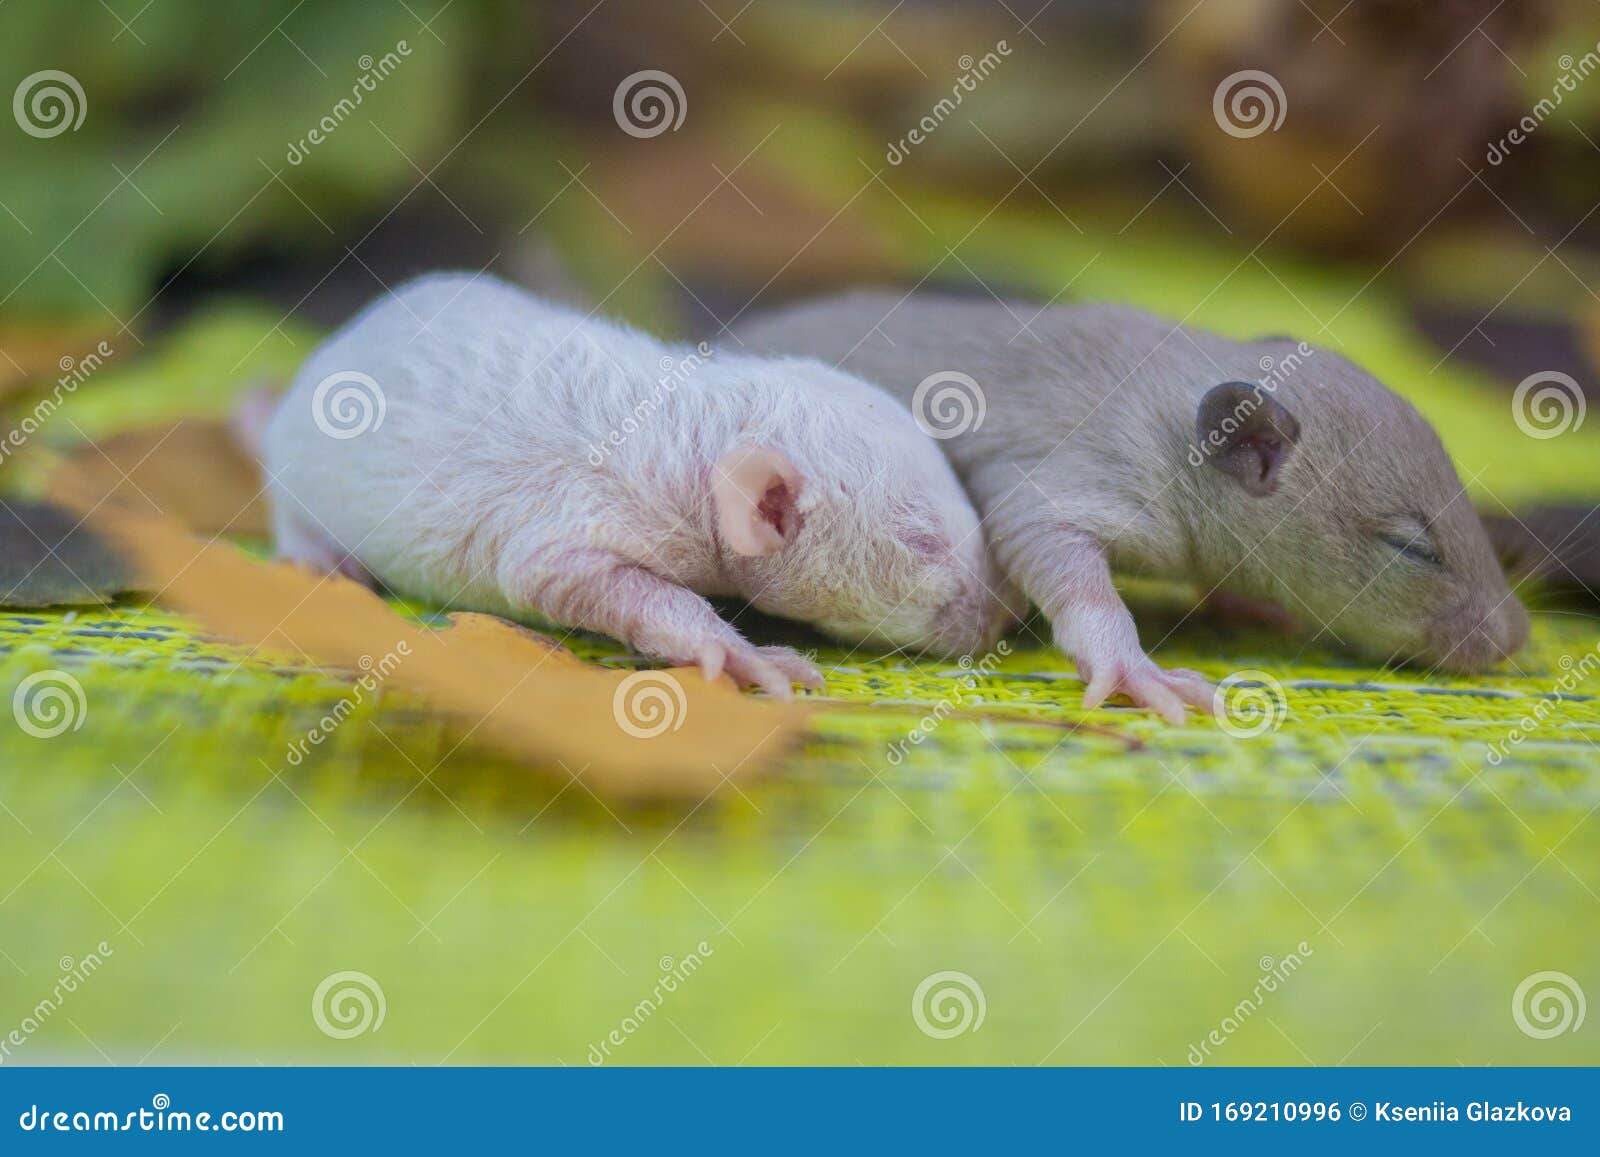 Baby Rats Are Small Fluffy And Cute Among The Foliage Of Trees Stock Photo Image Of Chinese Design 169210996